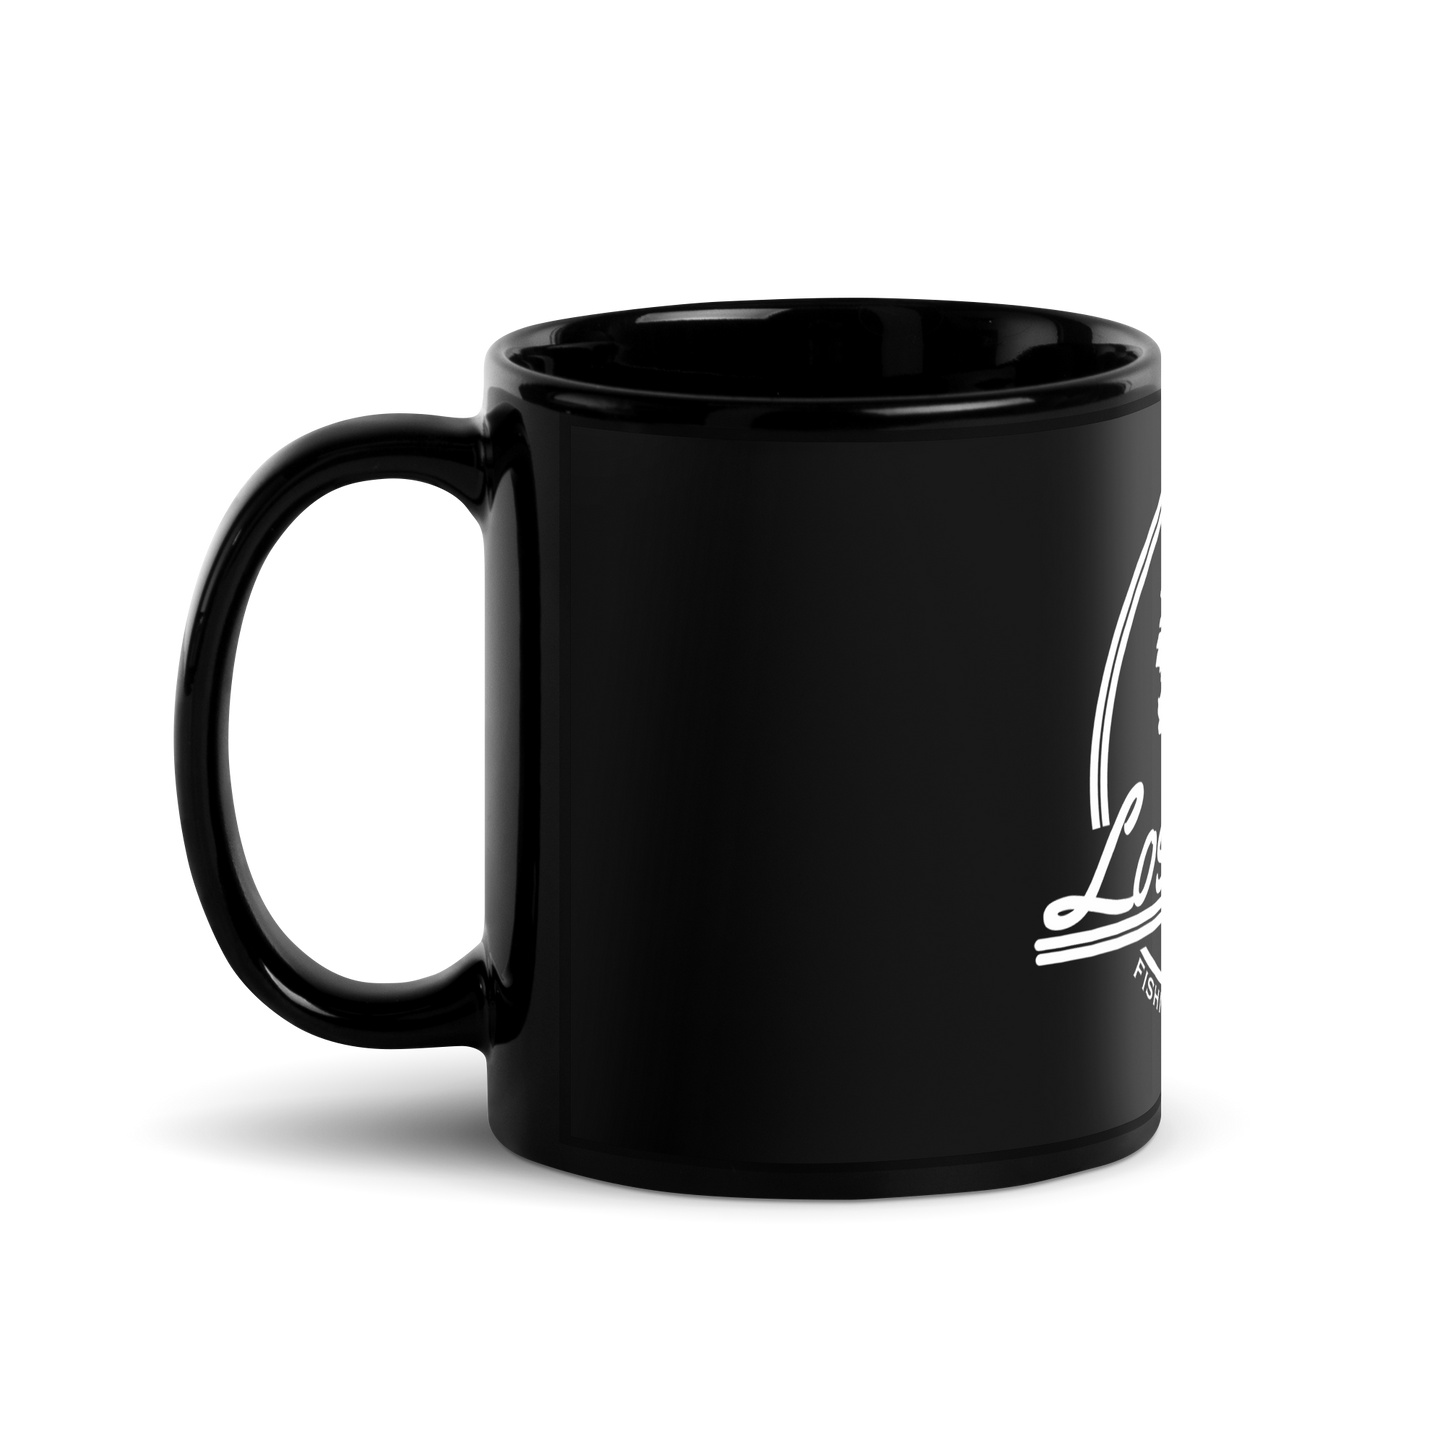 Black fishing coffee mug with white Lost Lure logo on the side. Ride back side view